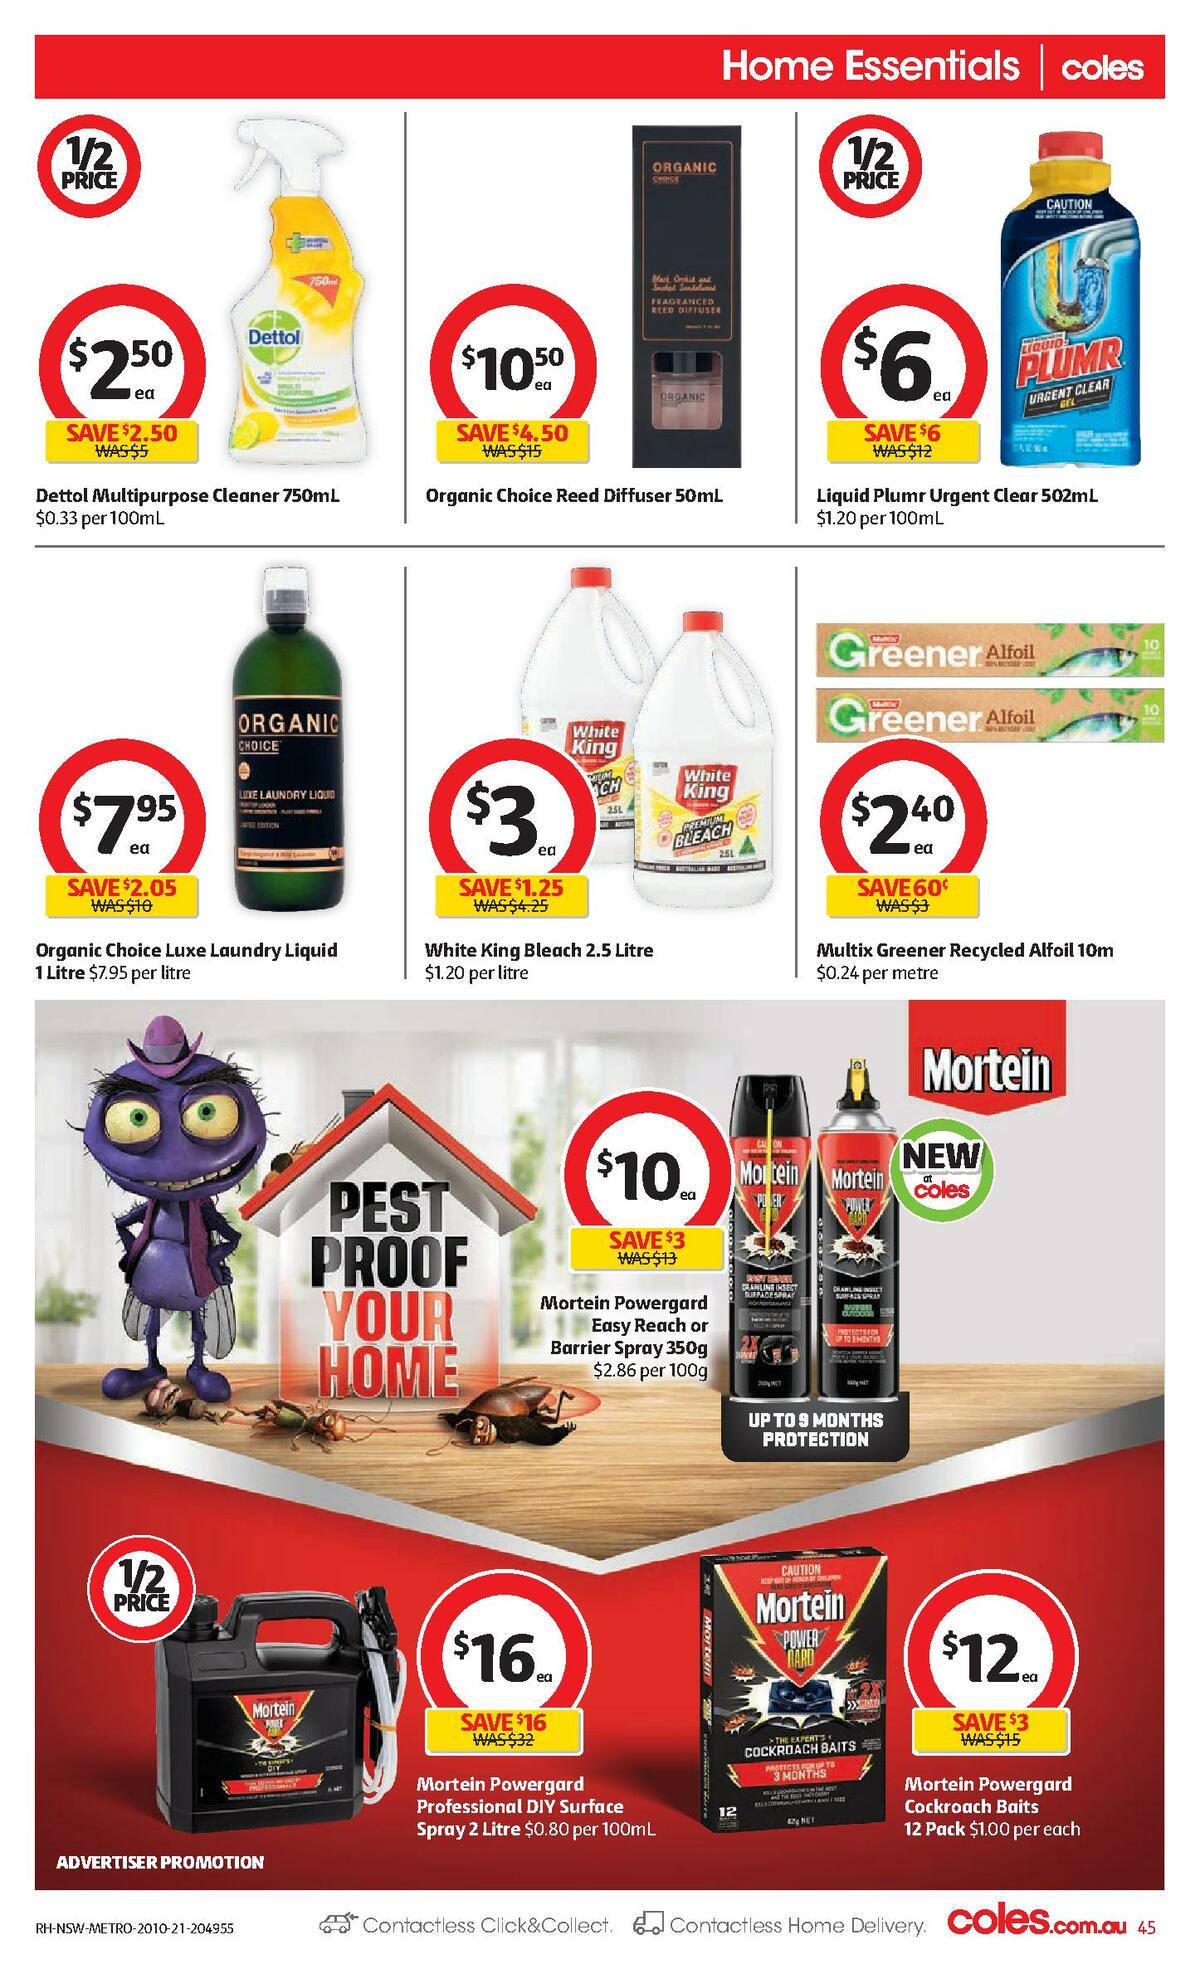 Coles Catalogues from 20 October